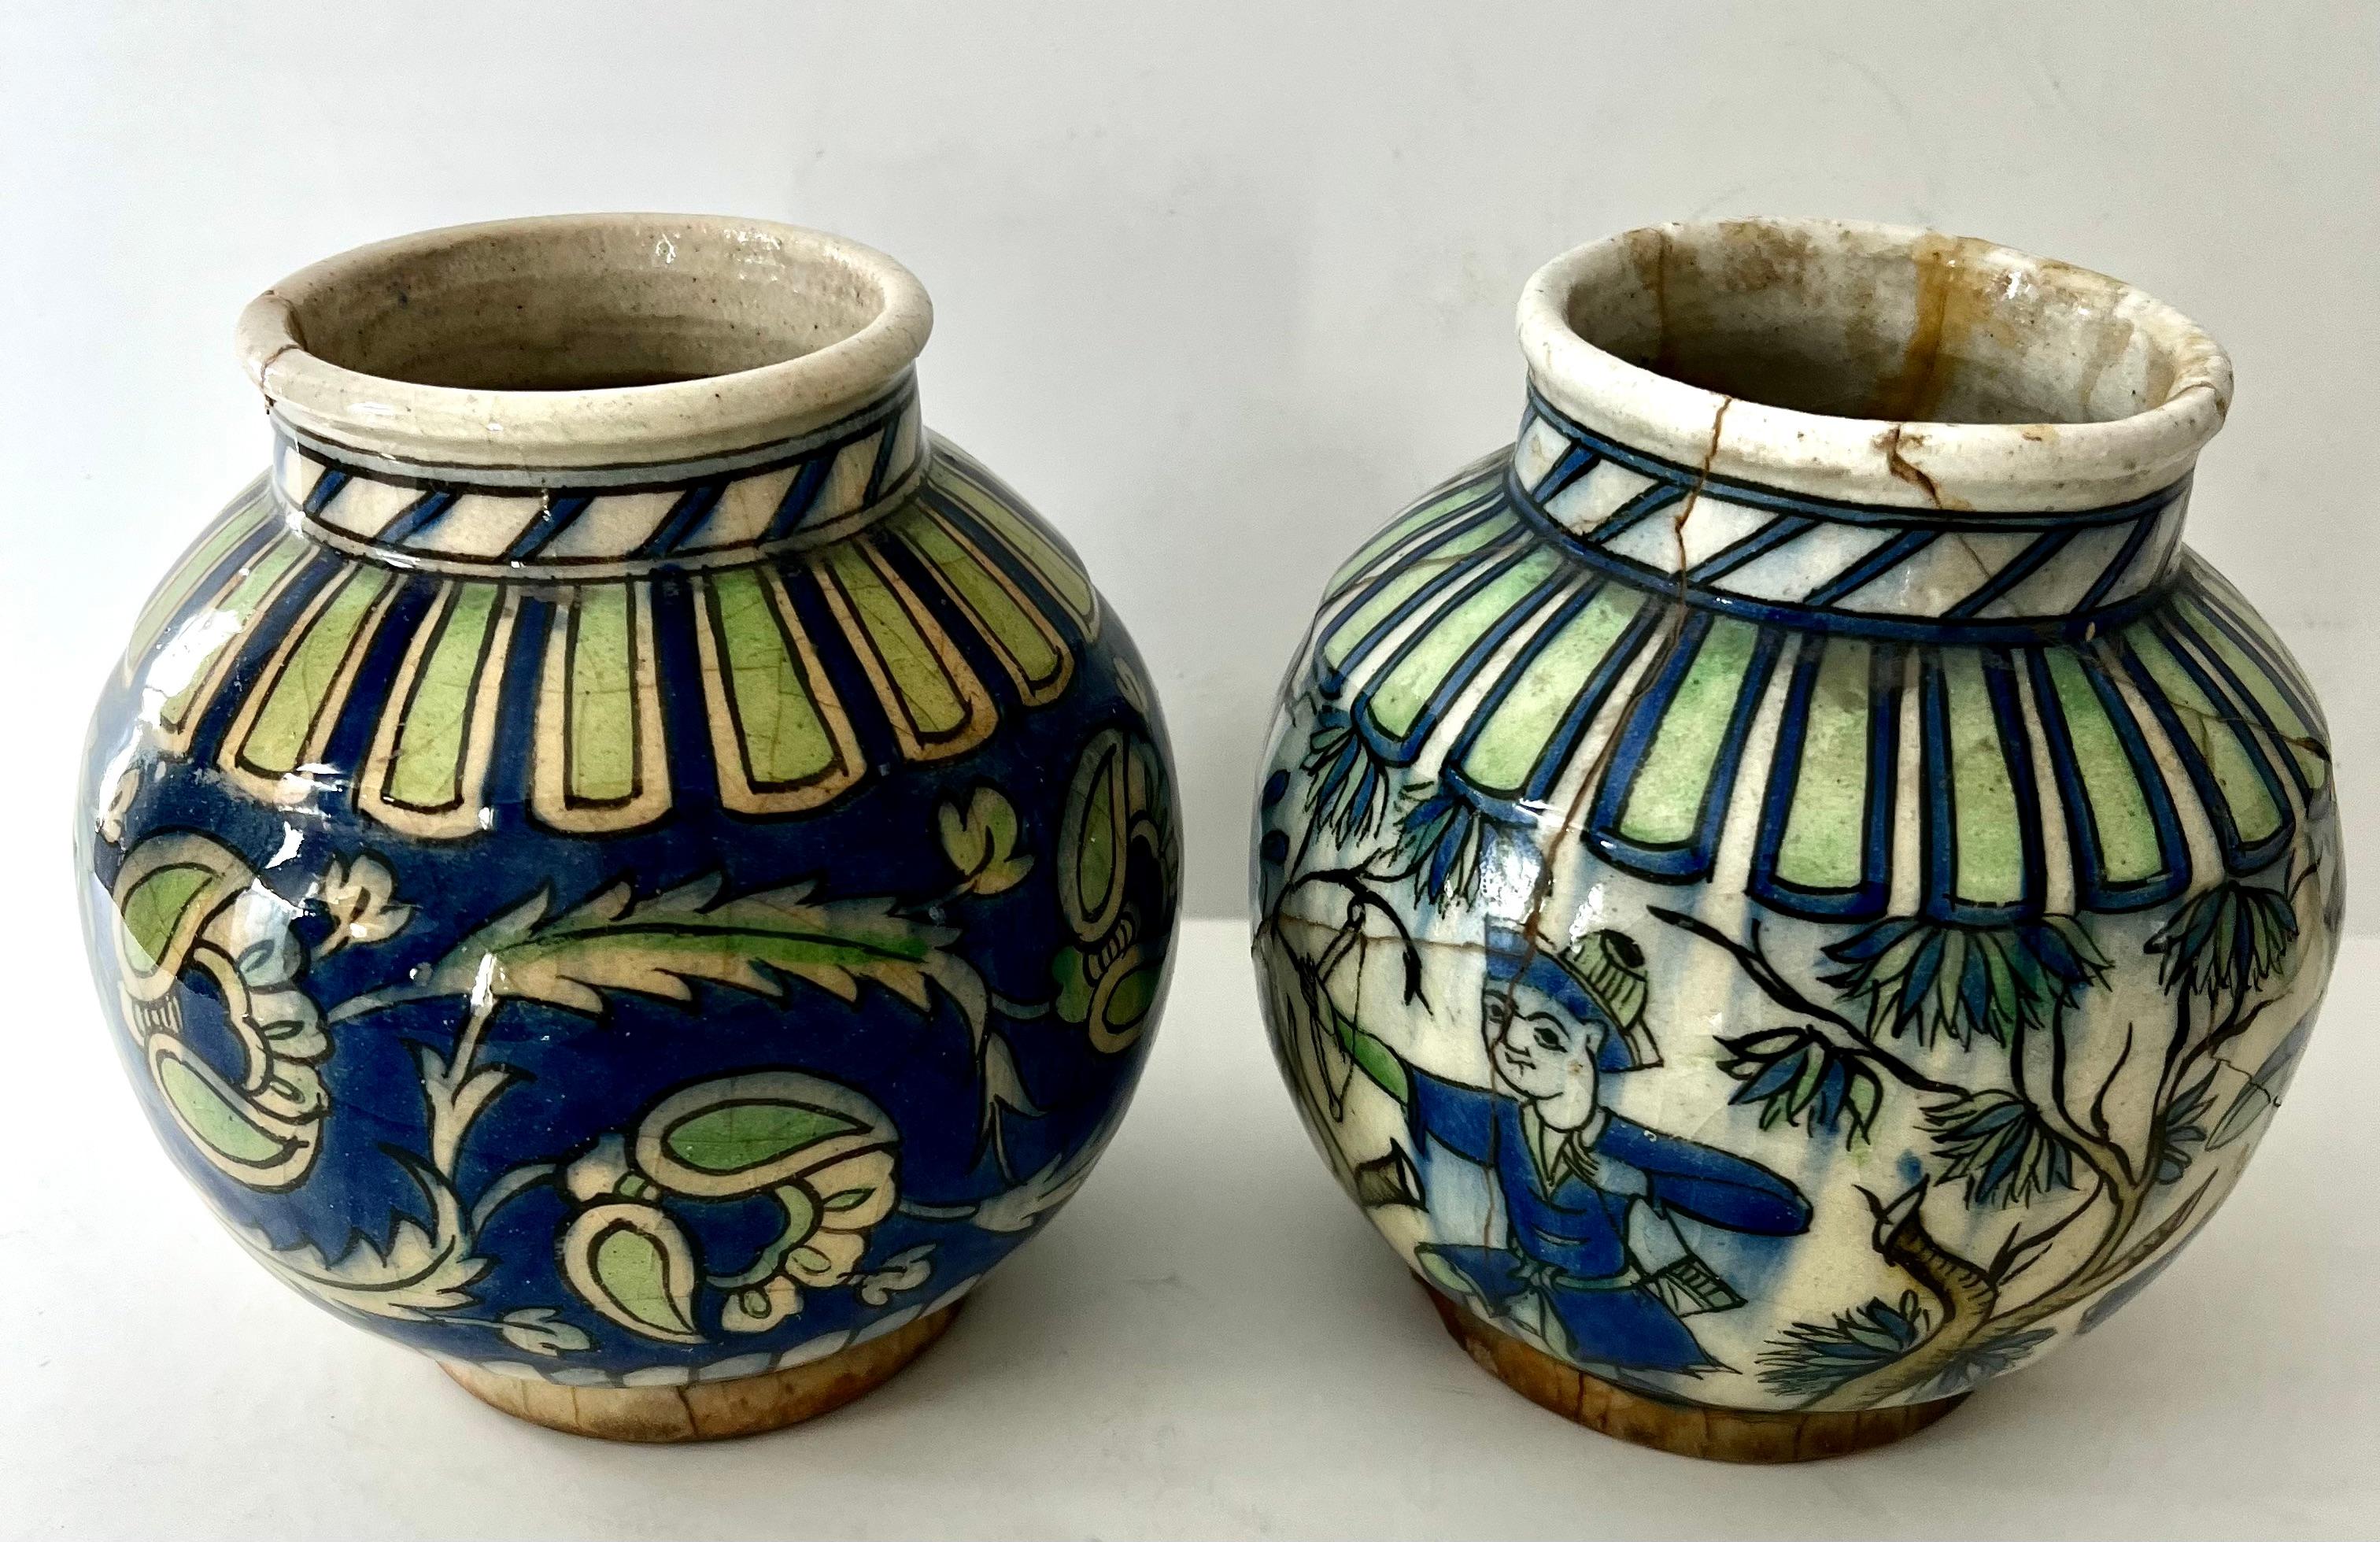 A stunning pair of Italian Containers / planters. The pair are wonderful decorative pieces. Both have different hand painted decor or scenes that are very decorative and lovely - both have colors that compliment each other.

A compliment to any